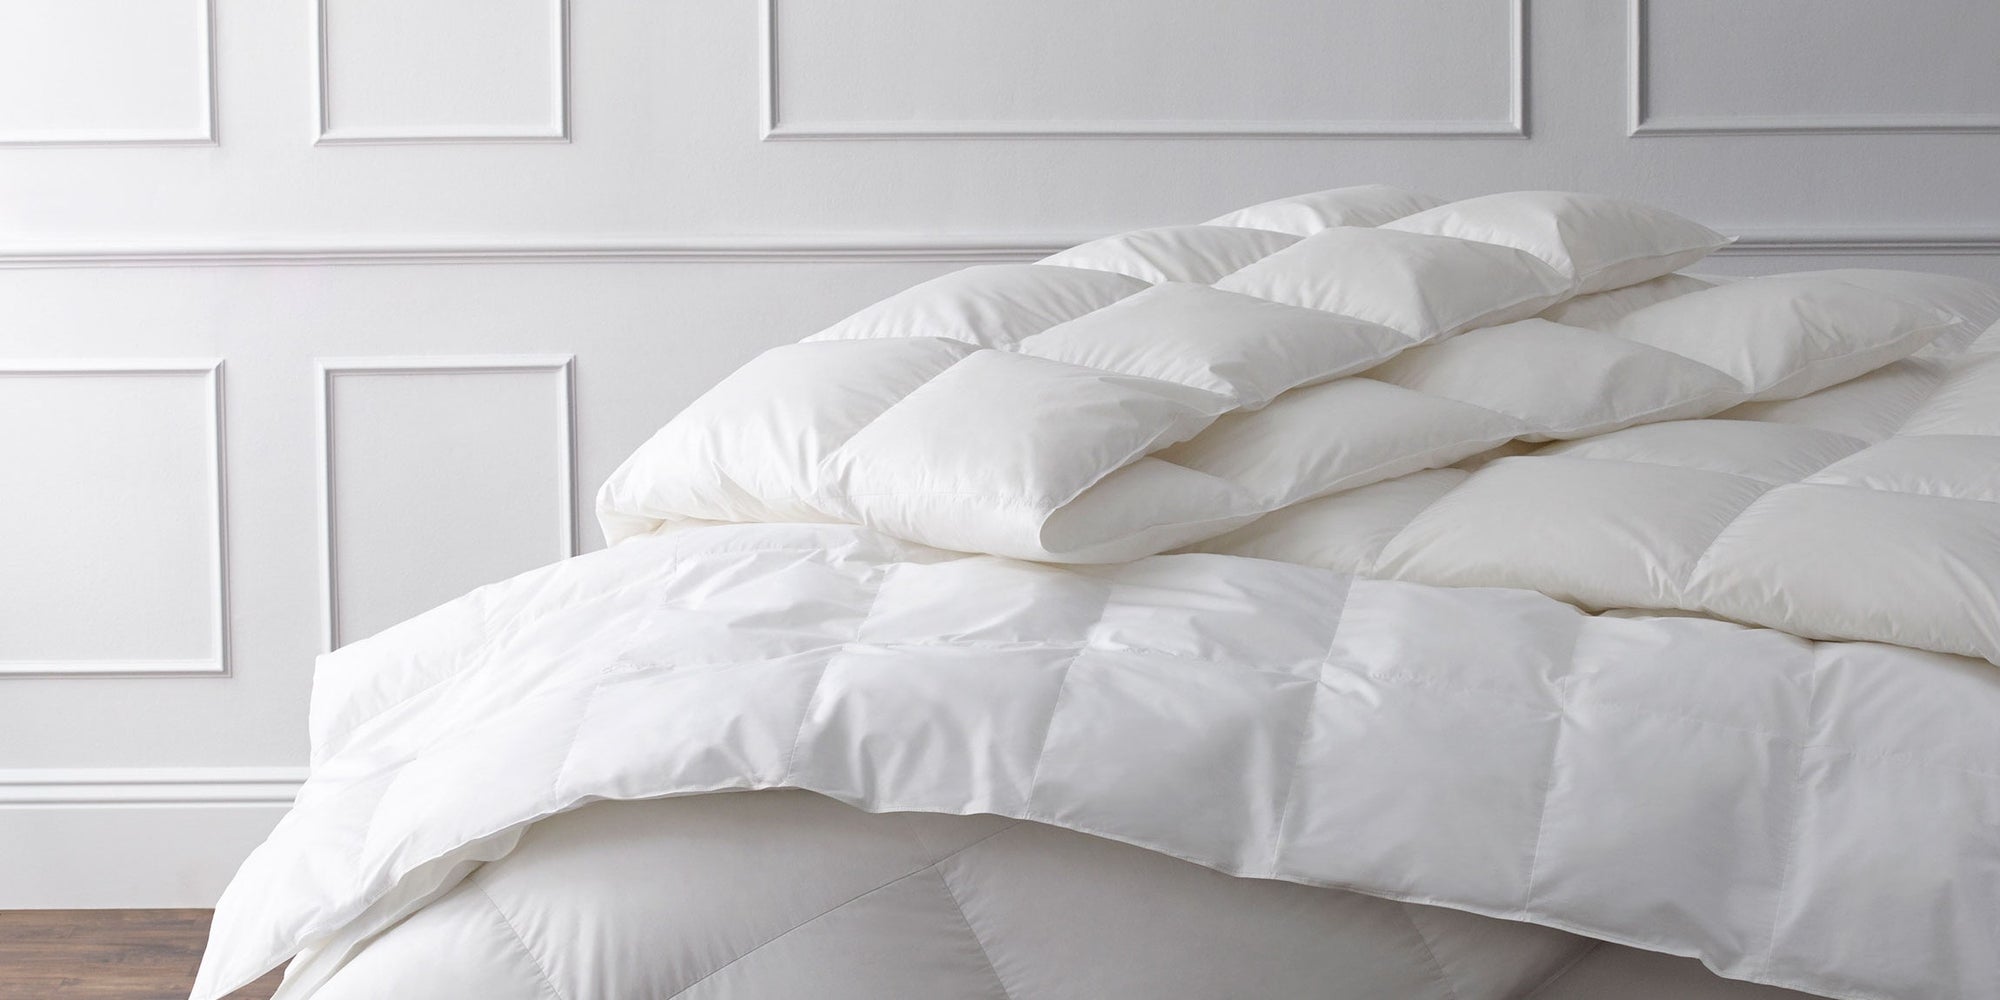 How To Wash Your Duvet Inner The Right Way To Ensure Longevity And Cleanliness